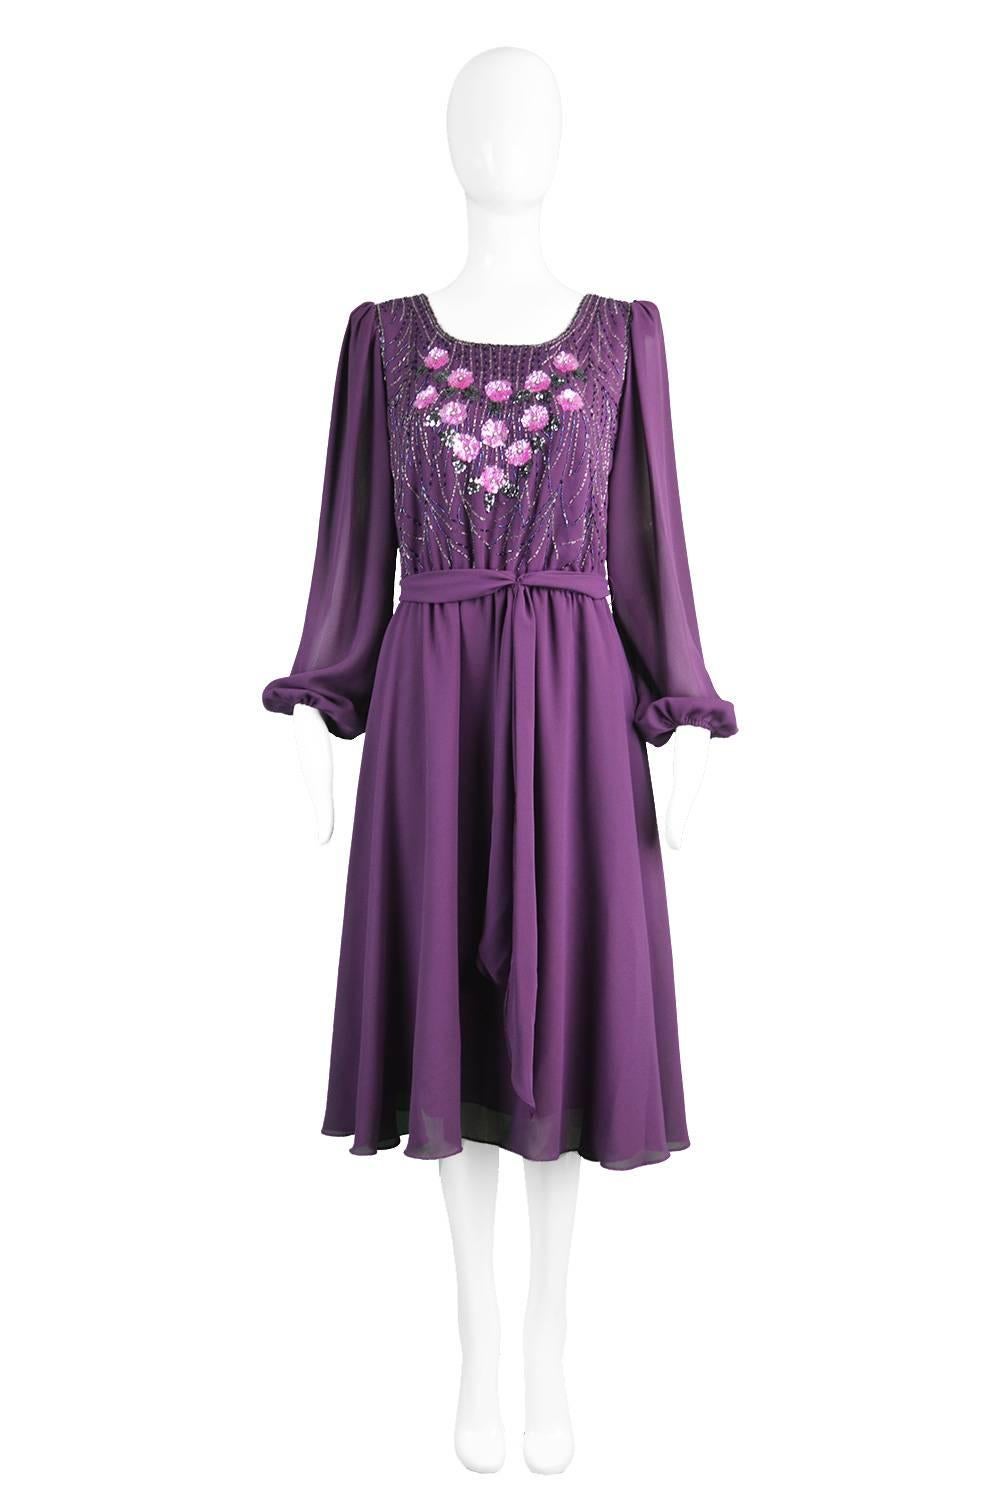 A glamorous purple vintage beaded dress from the 1970s with billowing chiffon balloon sleeves by Jack Bryan.

Estimated Size: UK 12-14/ US 8-10/ EU 40-42
Bust - 38” / 96cm
Waist - Stretches from 26-32” / 66-81cm
Hips - Free
Length (Shoulder to